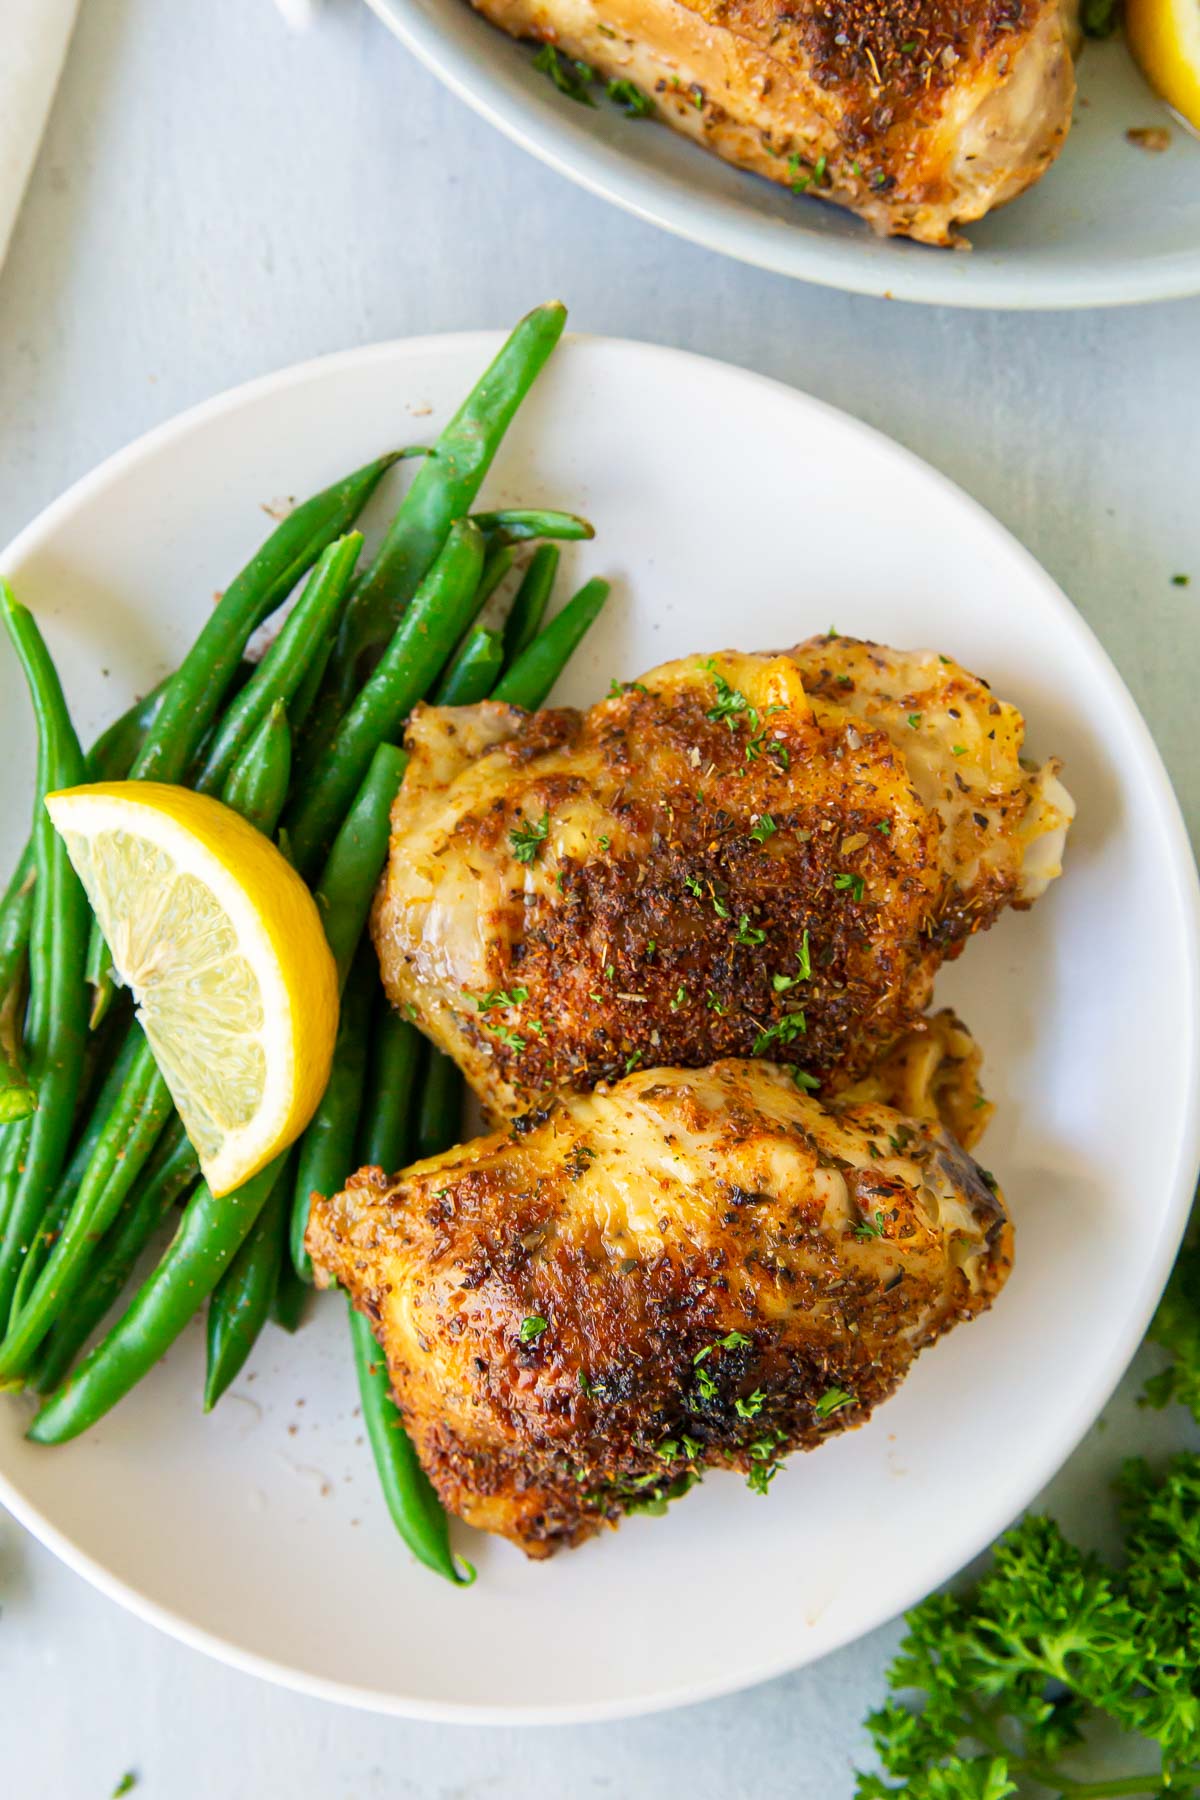 Two baked chicken thighs served on a plate with green beans.